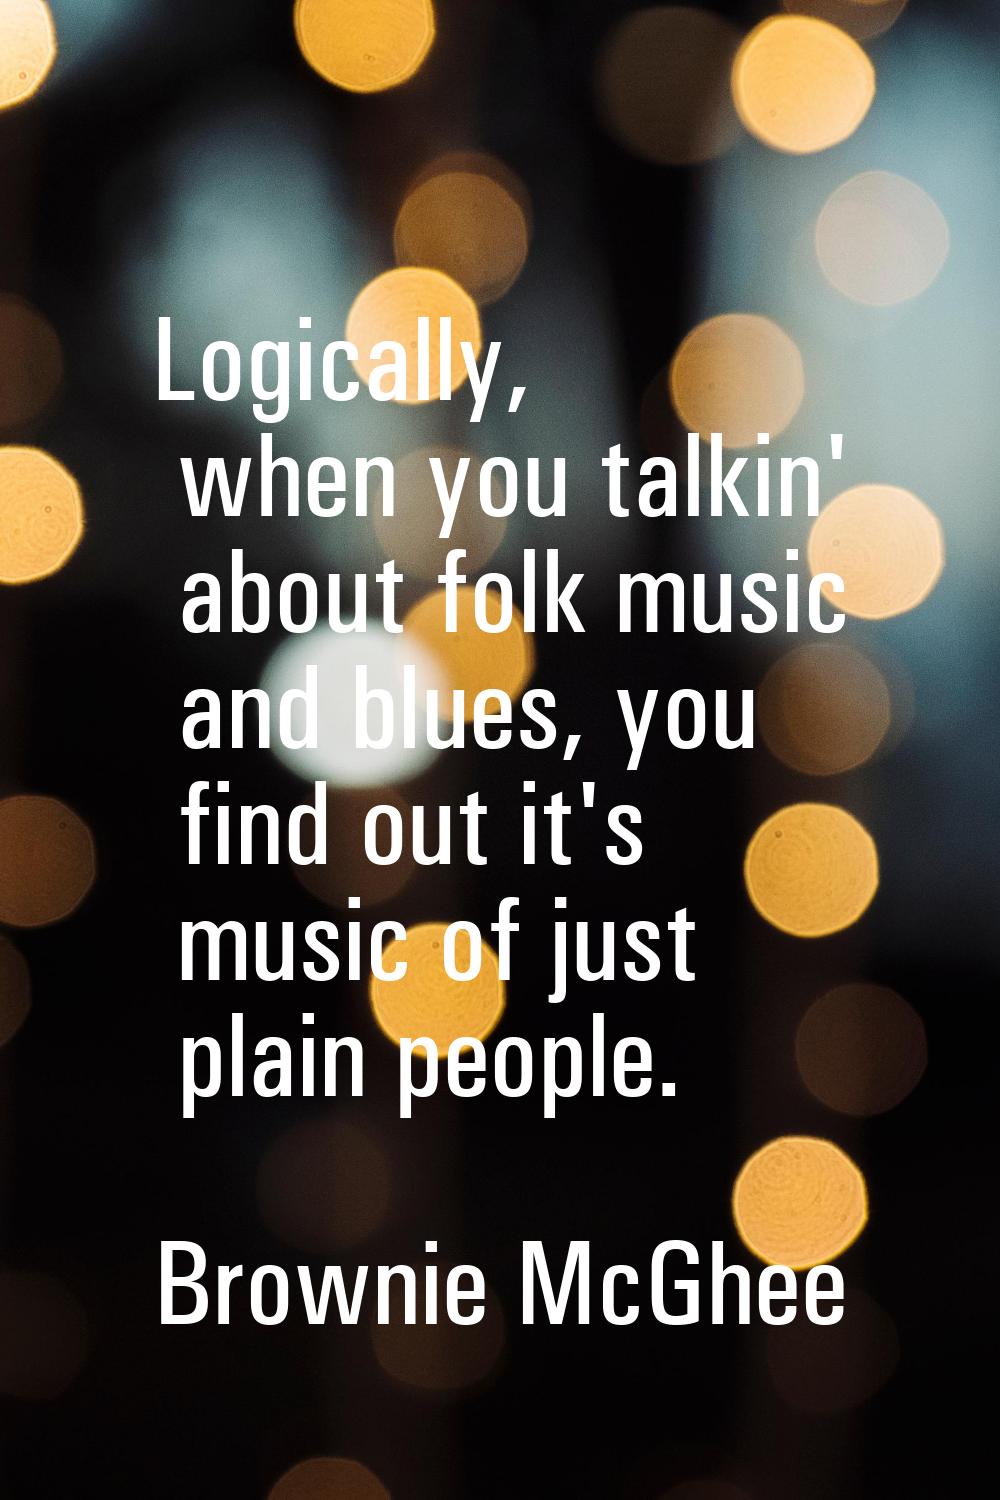 Logically, when you talkin' about folk music and blues, you find out it's music of just plain peopl